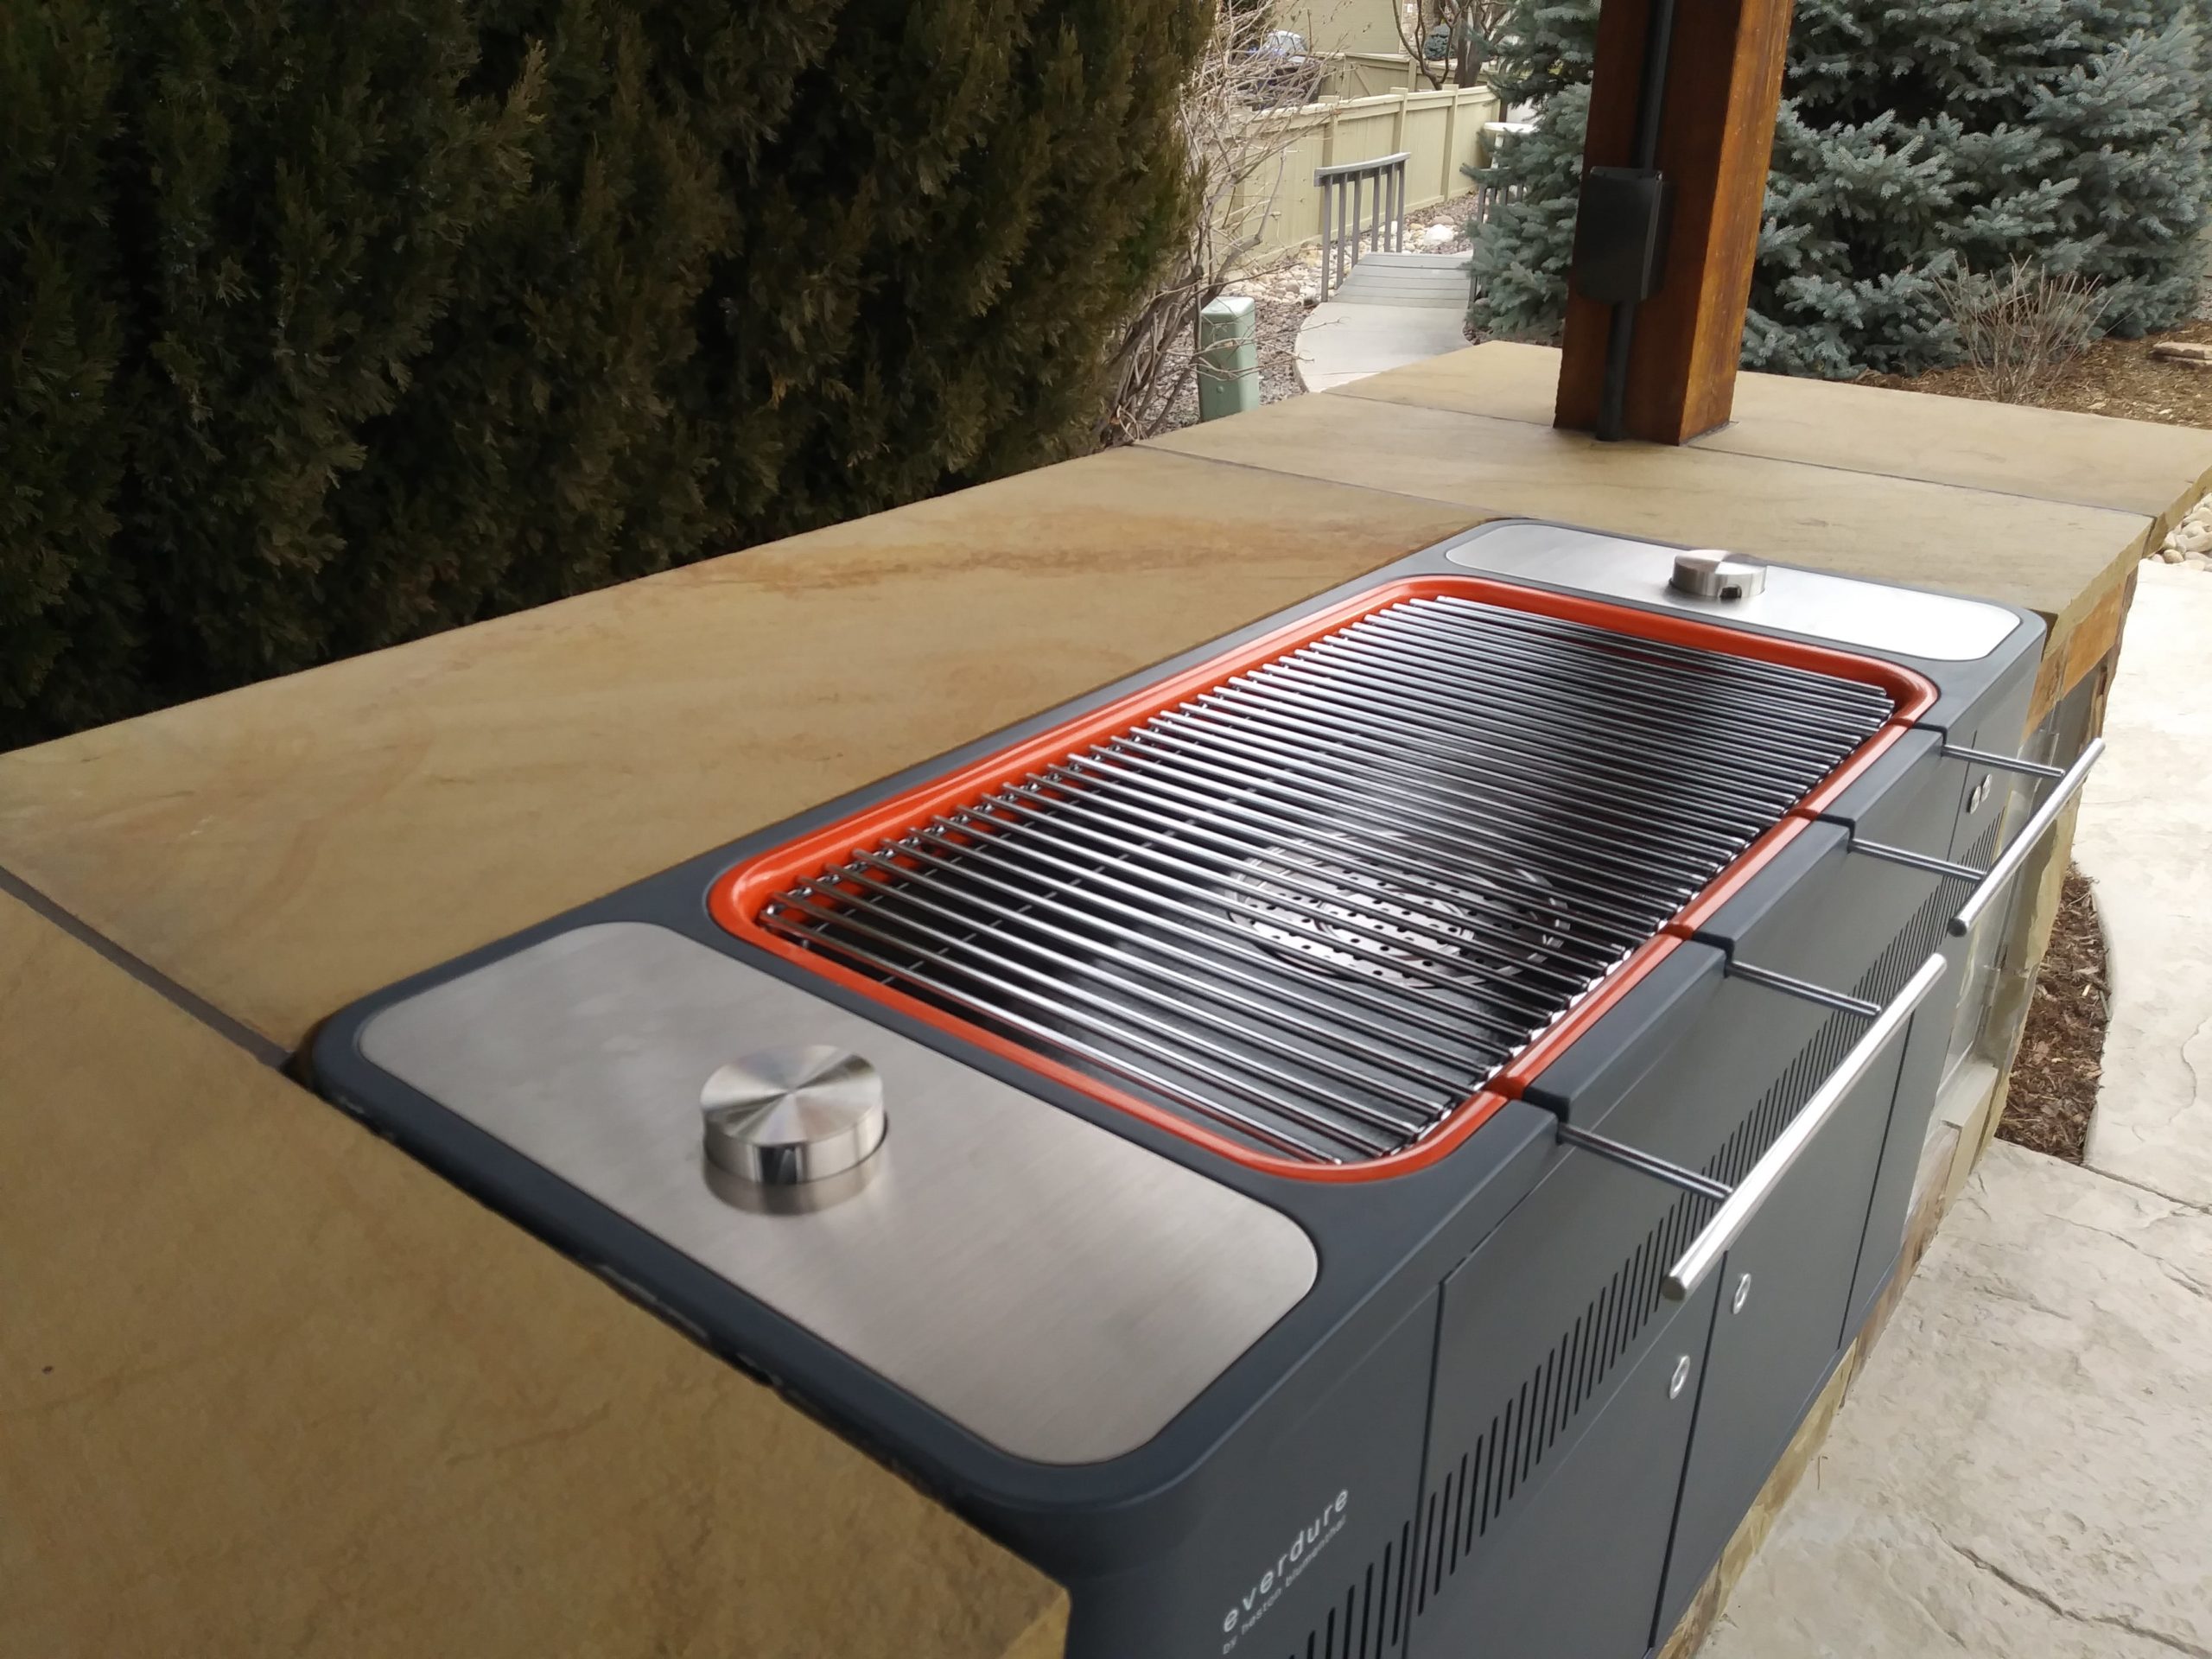 Outdoor grilling station grill.